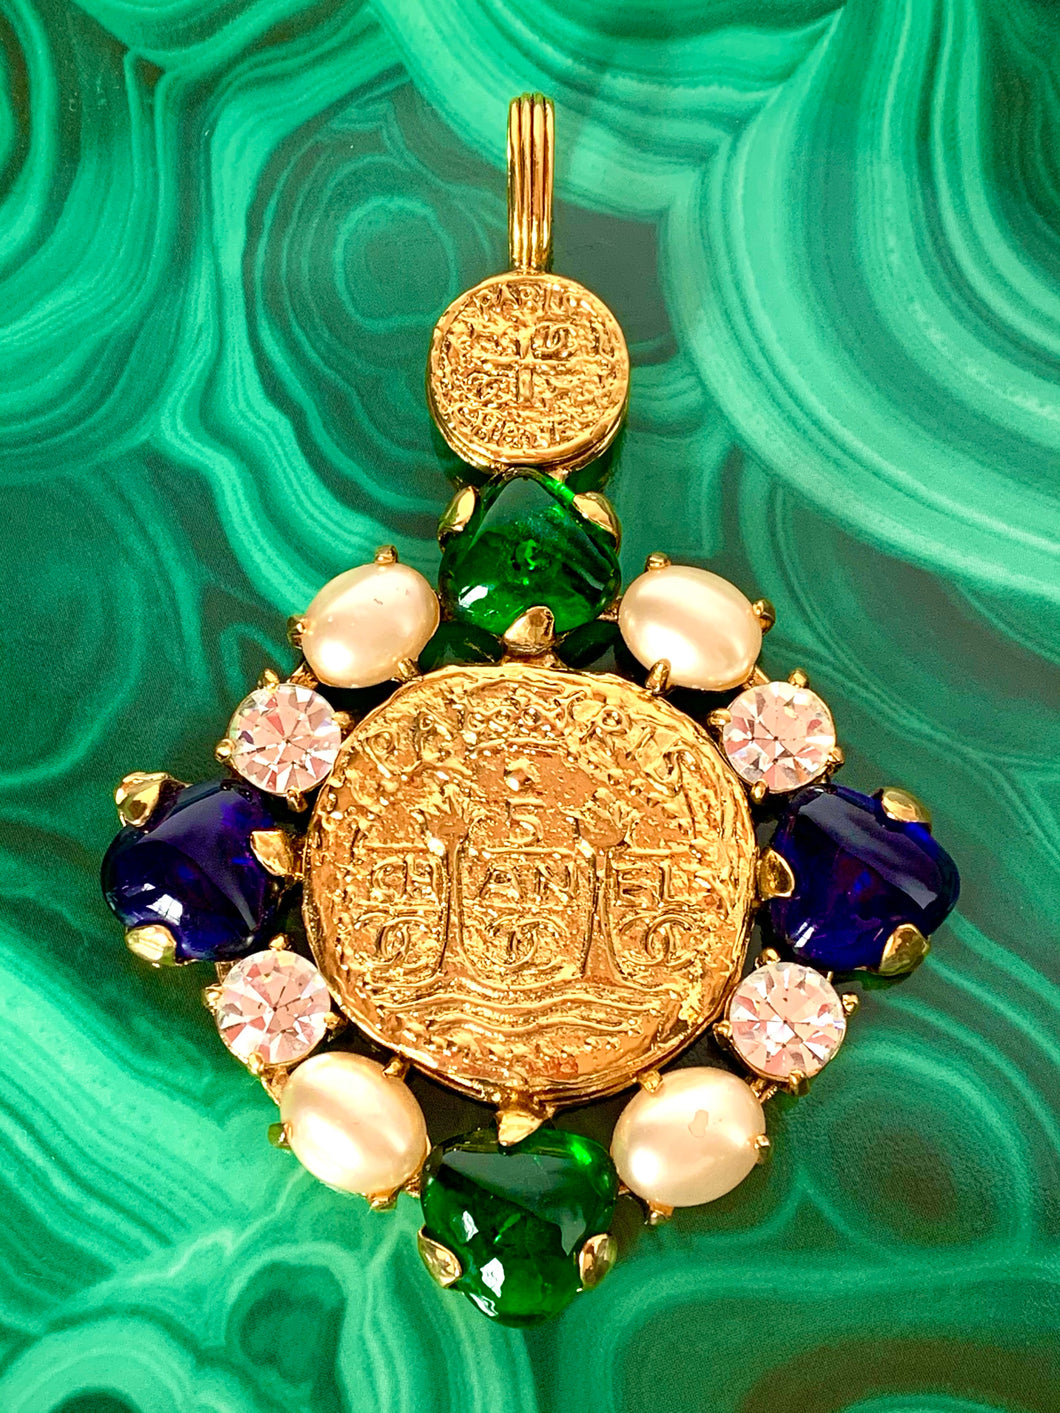 CHANEL MASSIVE BYZANTINE COIN GRIPOIX POURED GLASS AND GRIPOIX PEARL PENDANT NECKLACE VINTAGE 1993 ROBERT GOOSSENS